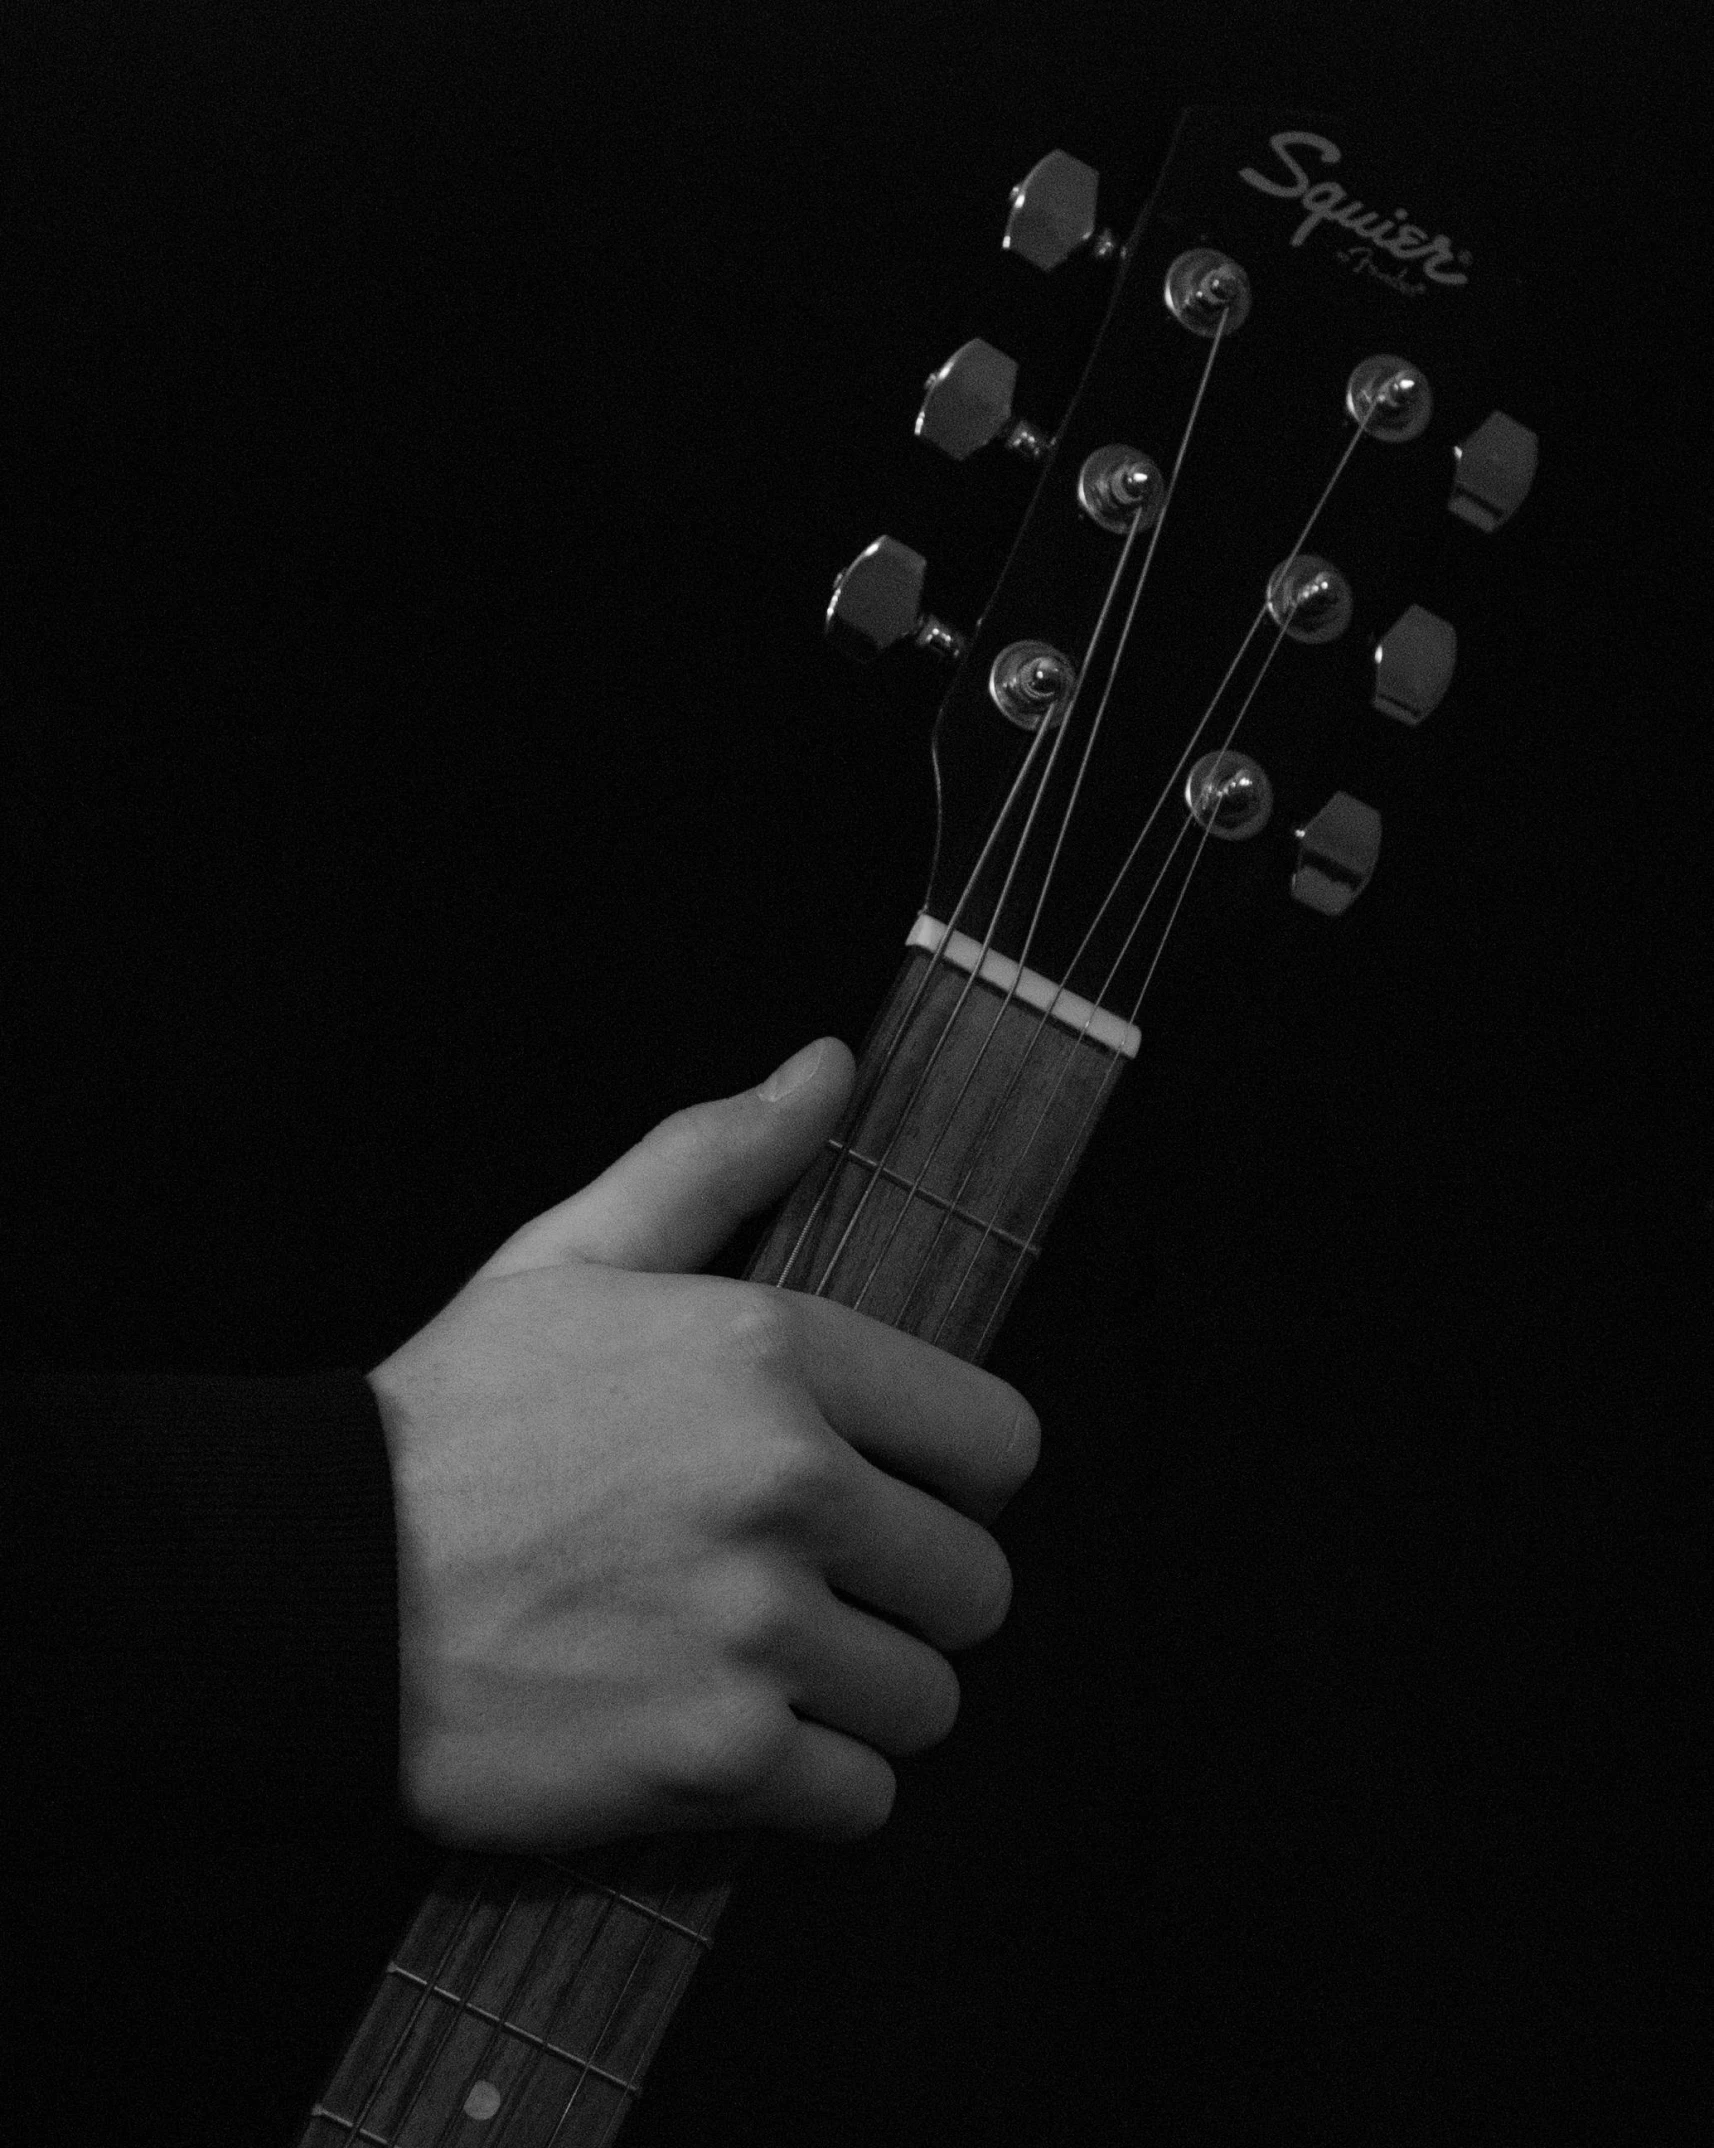 a person holding a guitar in their hands